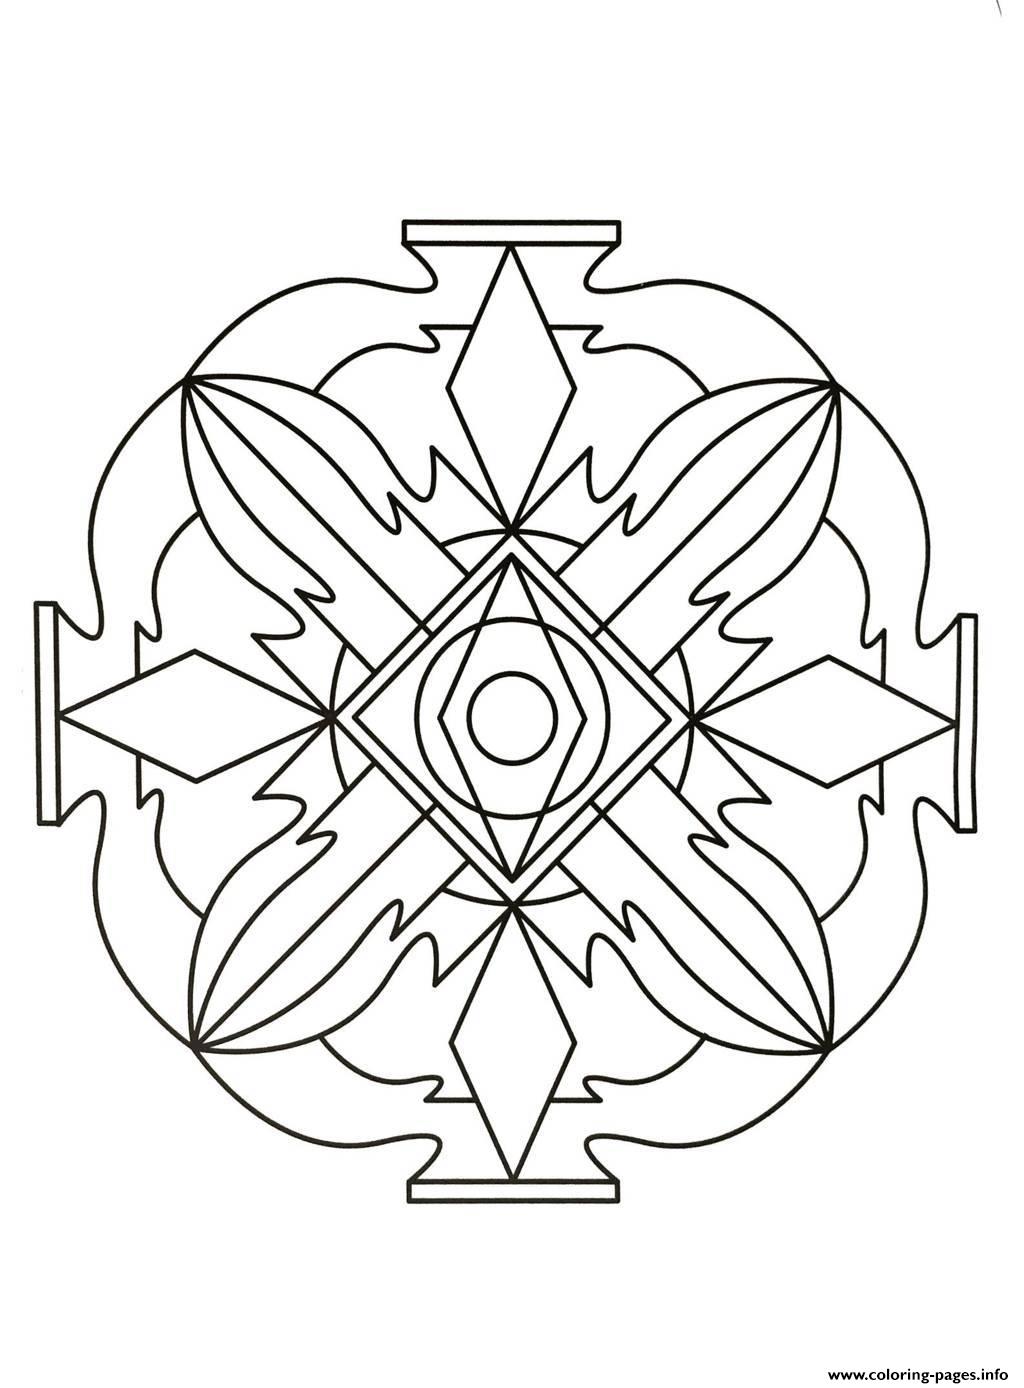 Mandalas To Download For Free 6  coloring